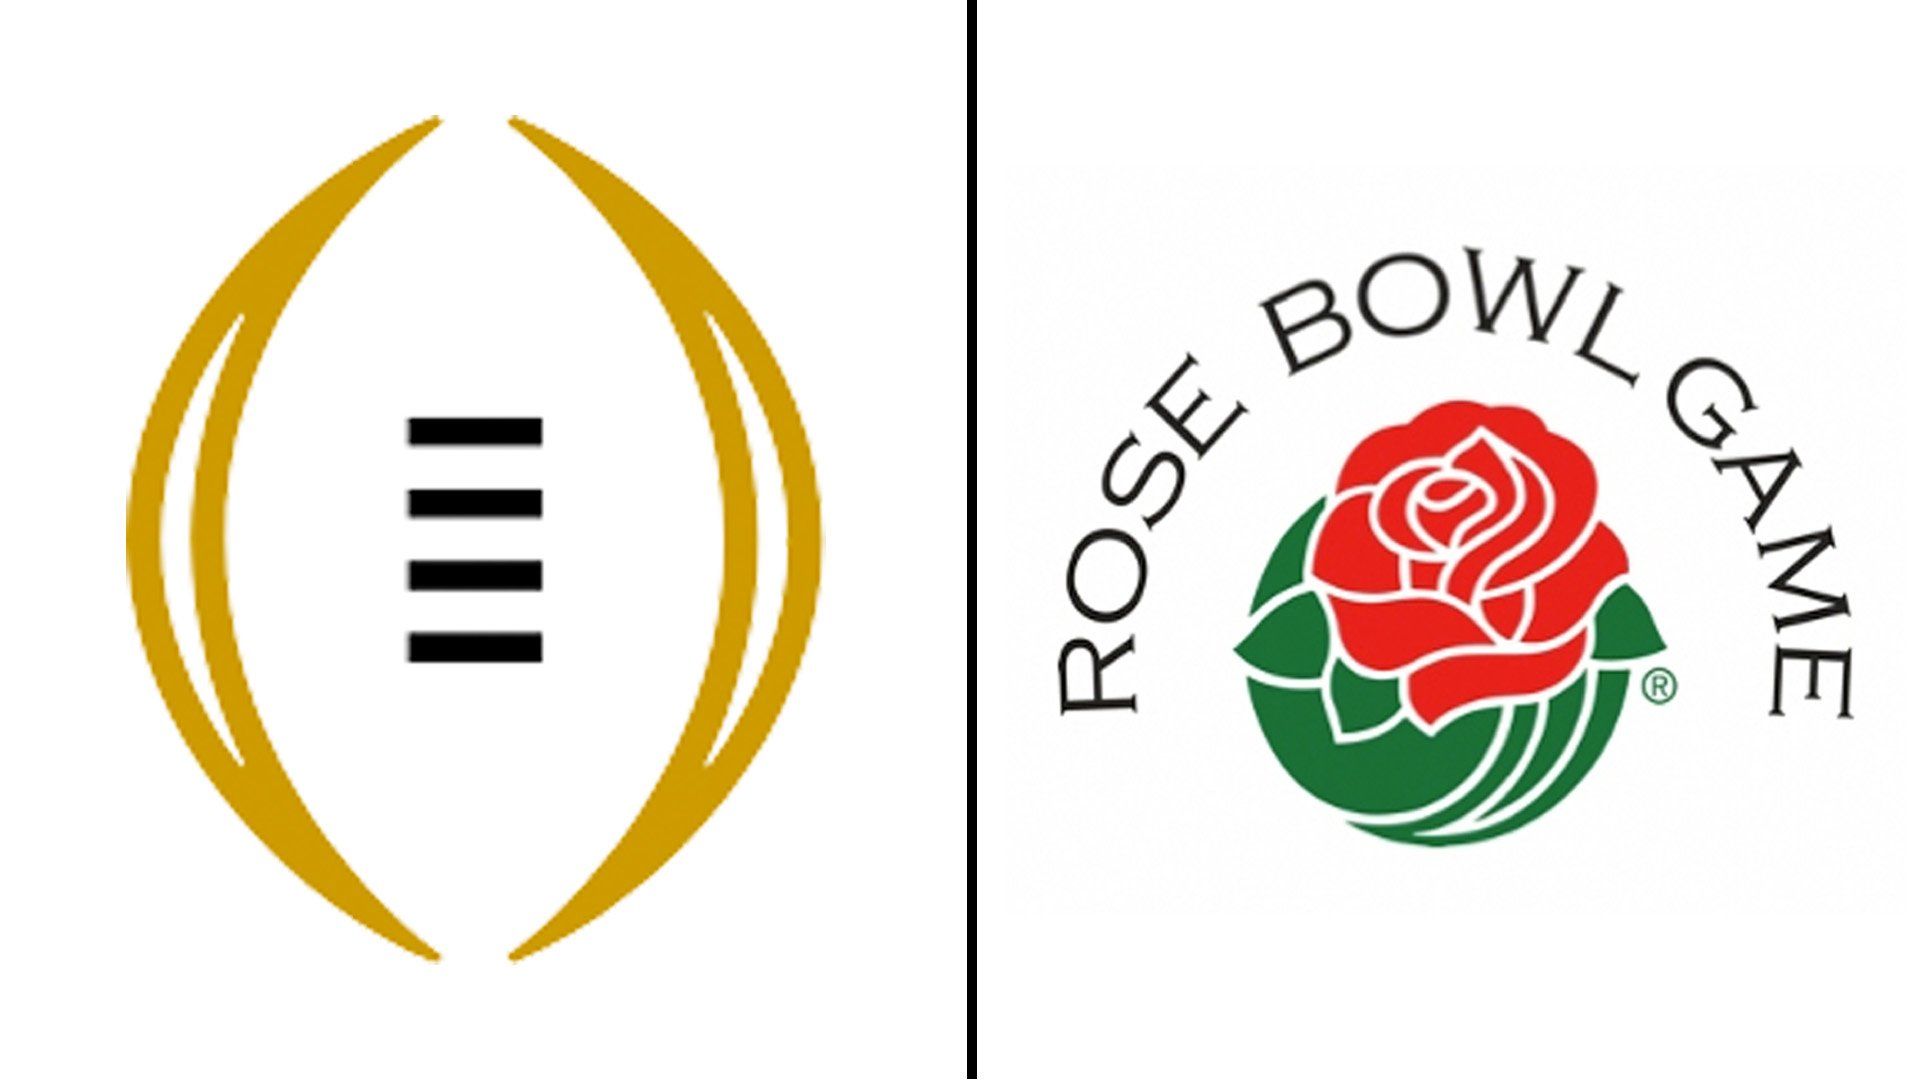 Rose Bowl agrees to amended deal, allowing 12team expansion to College